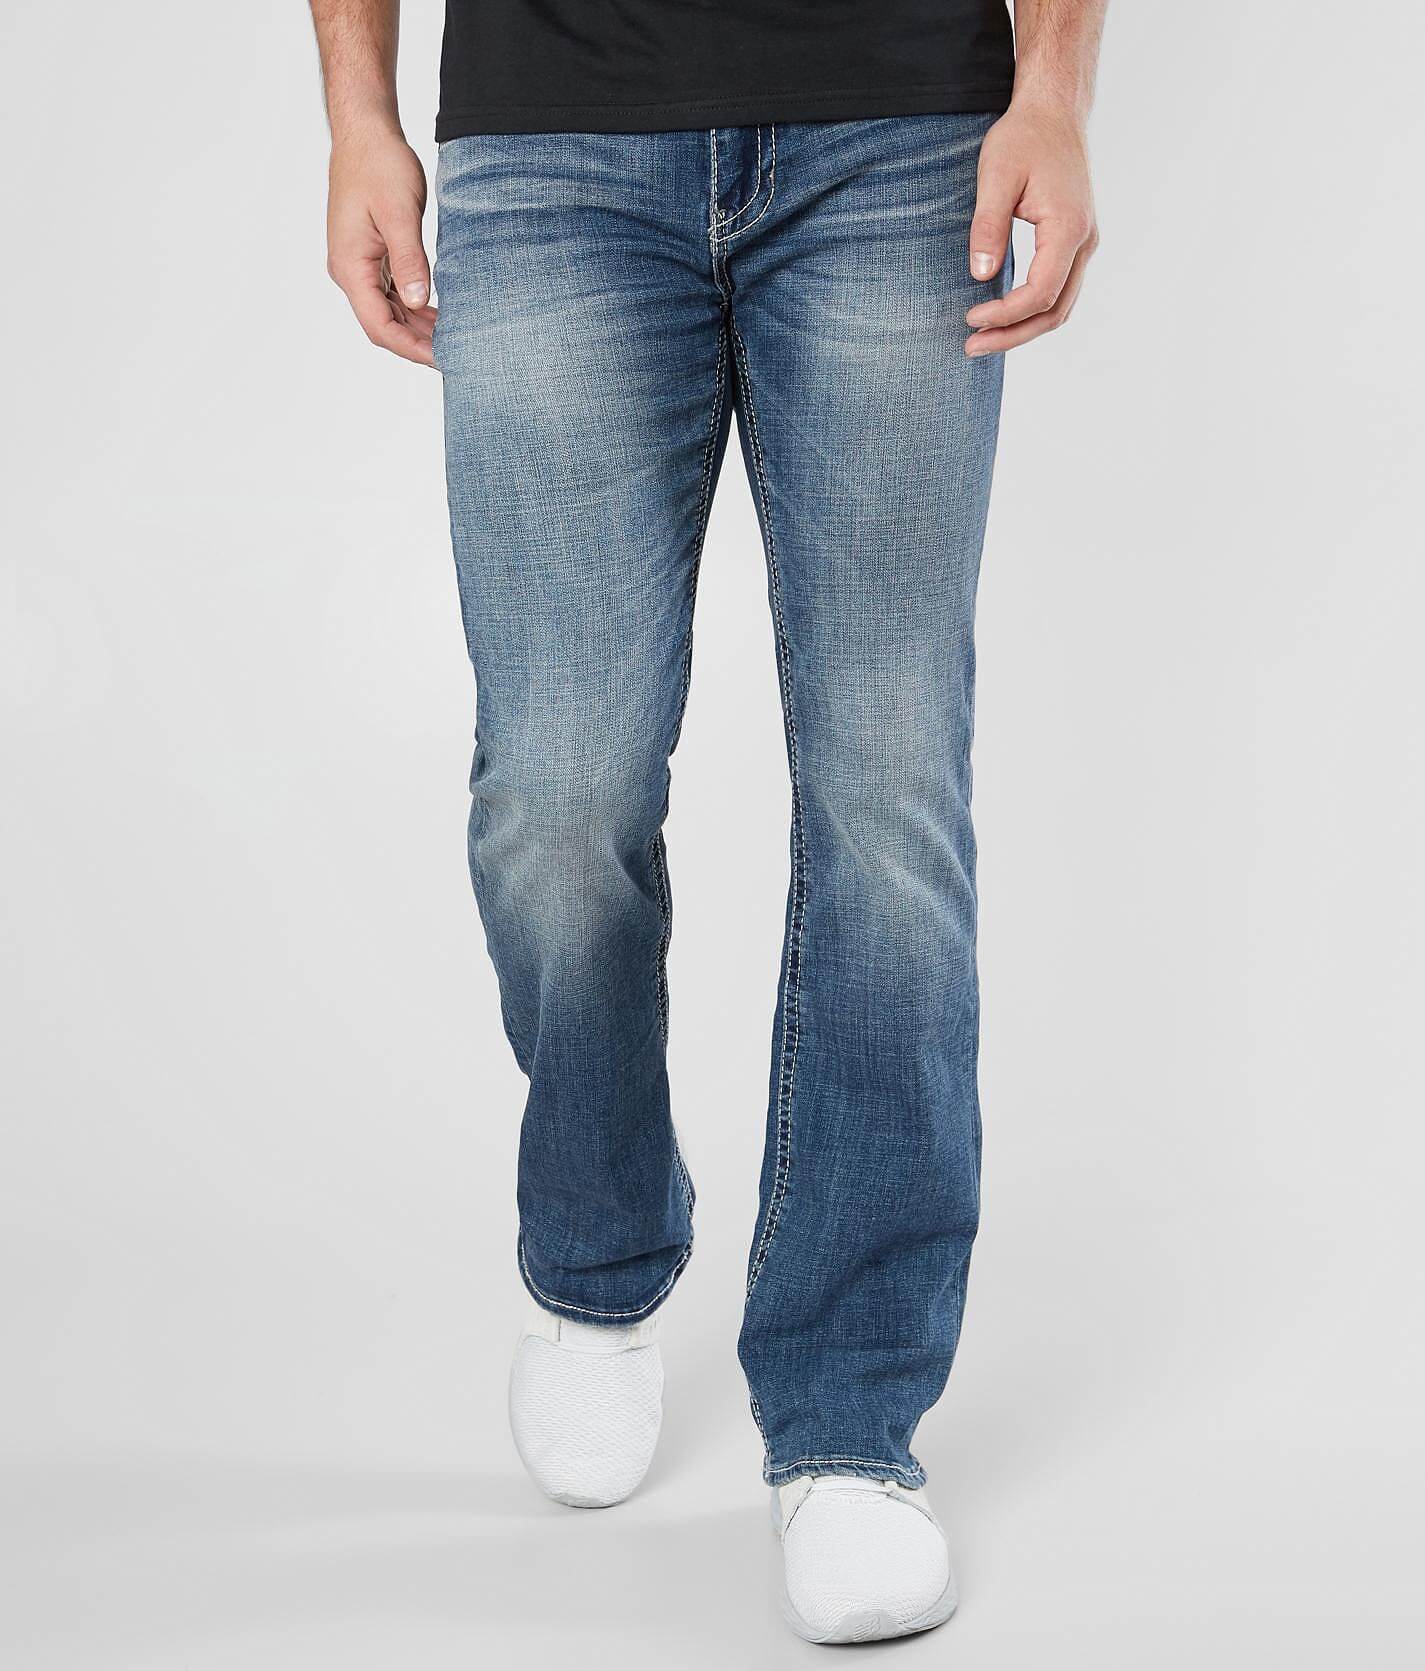 buckle jeans for men